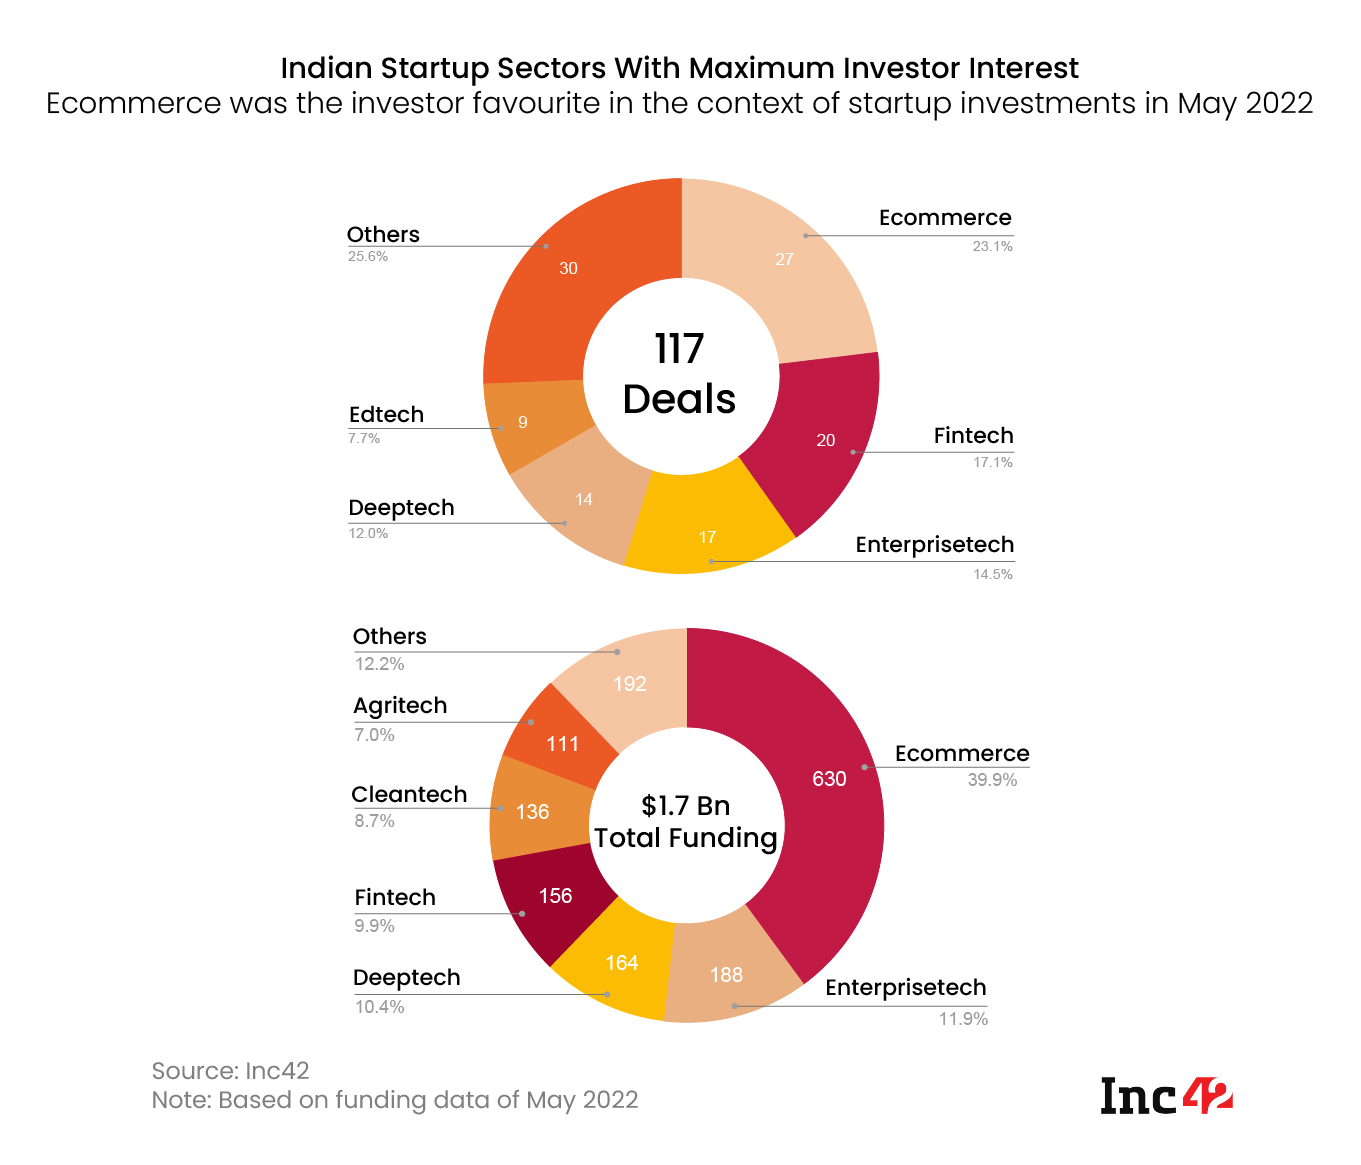 Ecommerce remained the preferred sector for investors in May 2022